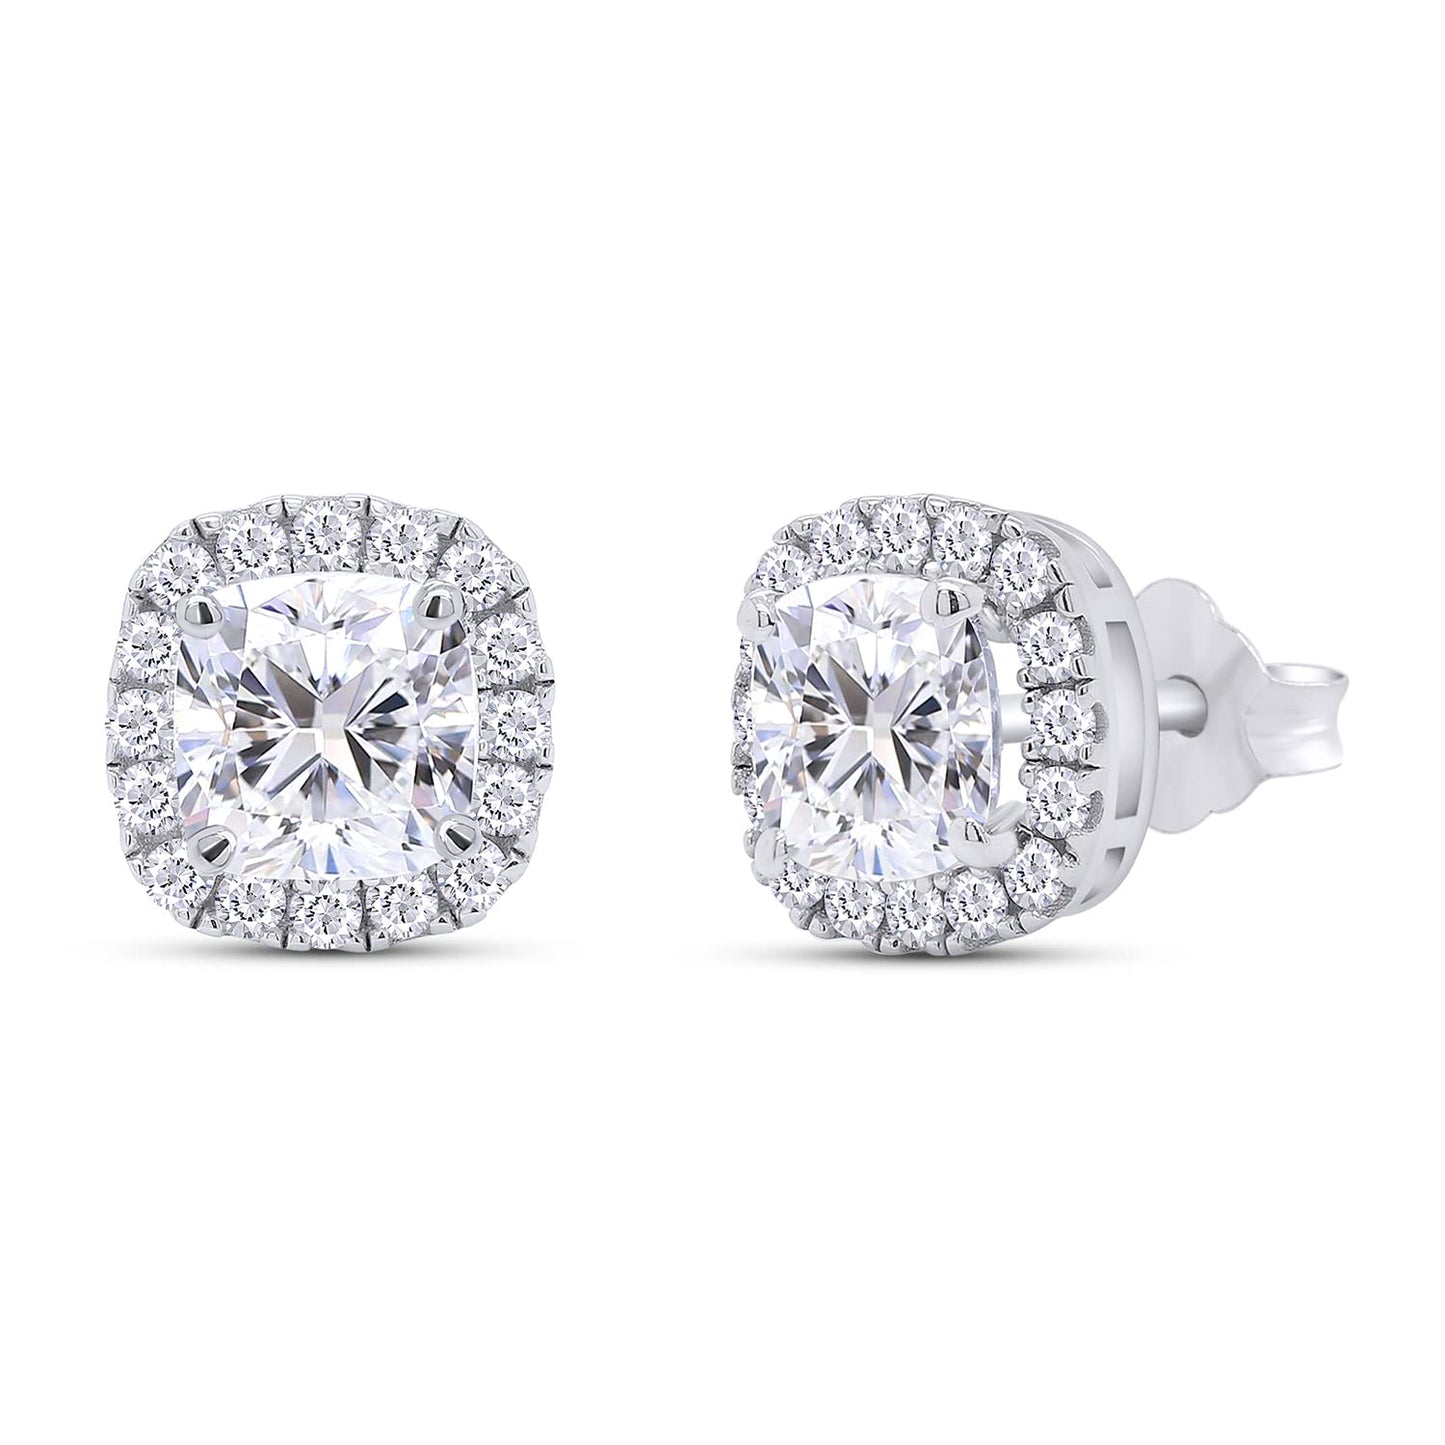 2 Carat Center Stone 6X6mm Lab Created Moissanite Diamond Push Back Halo Stud Earrings In 925 Sterling Silver (2 Cttw)